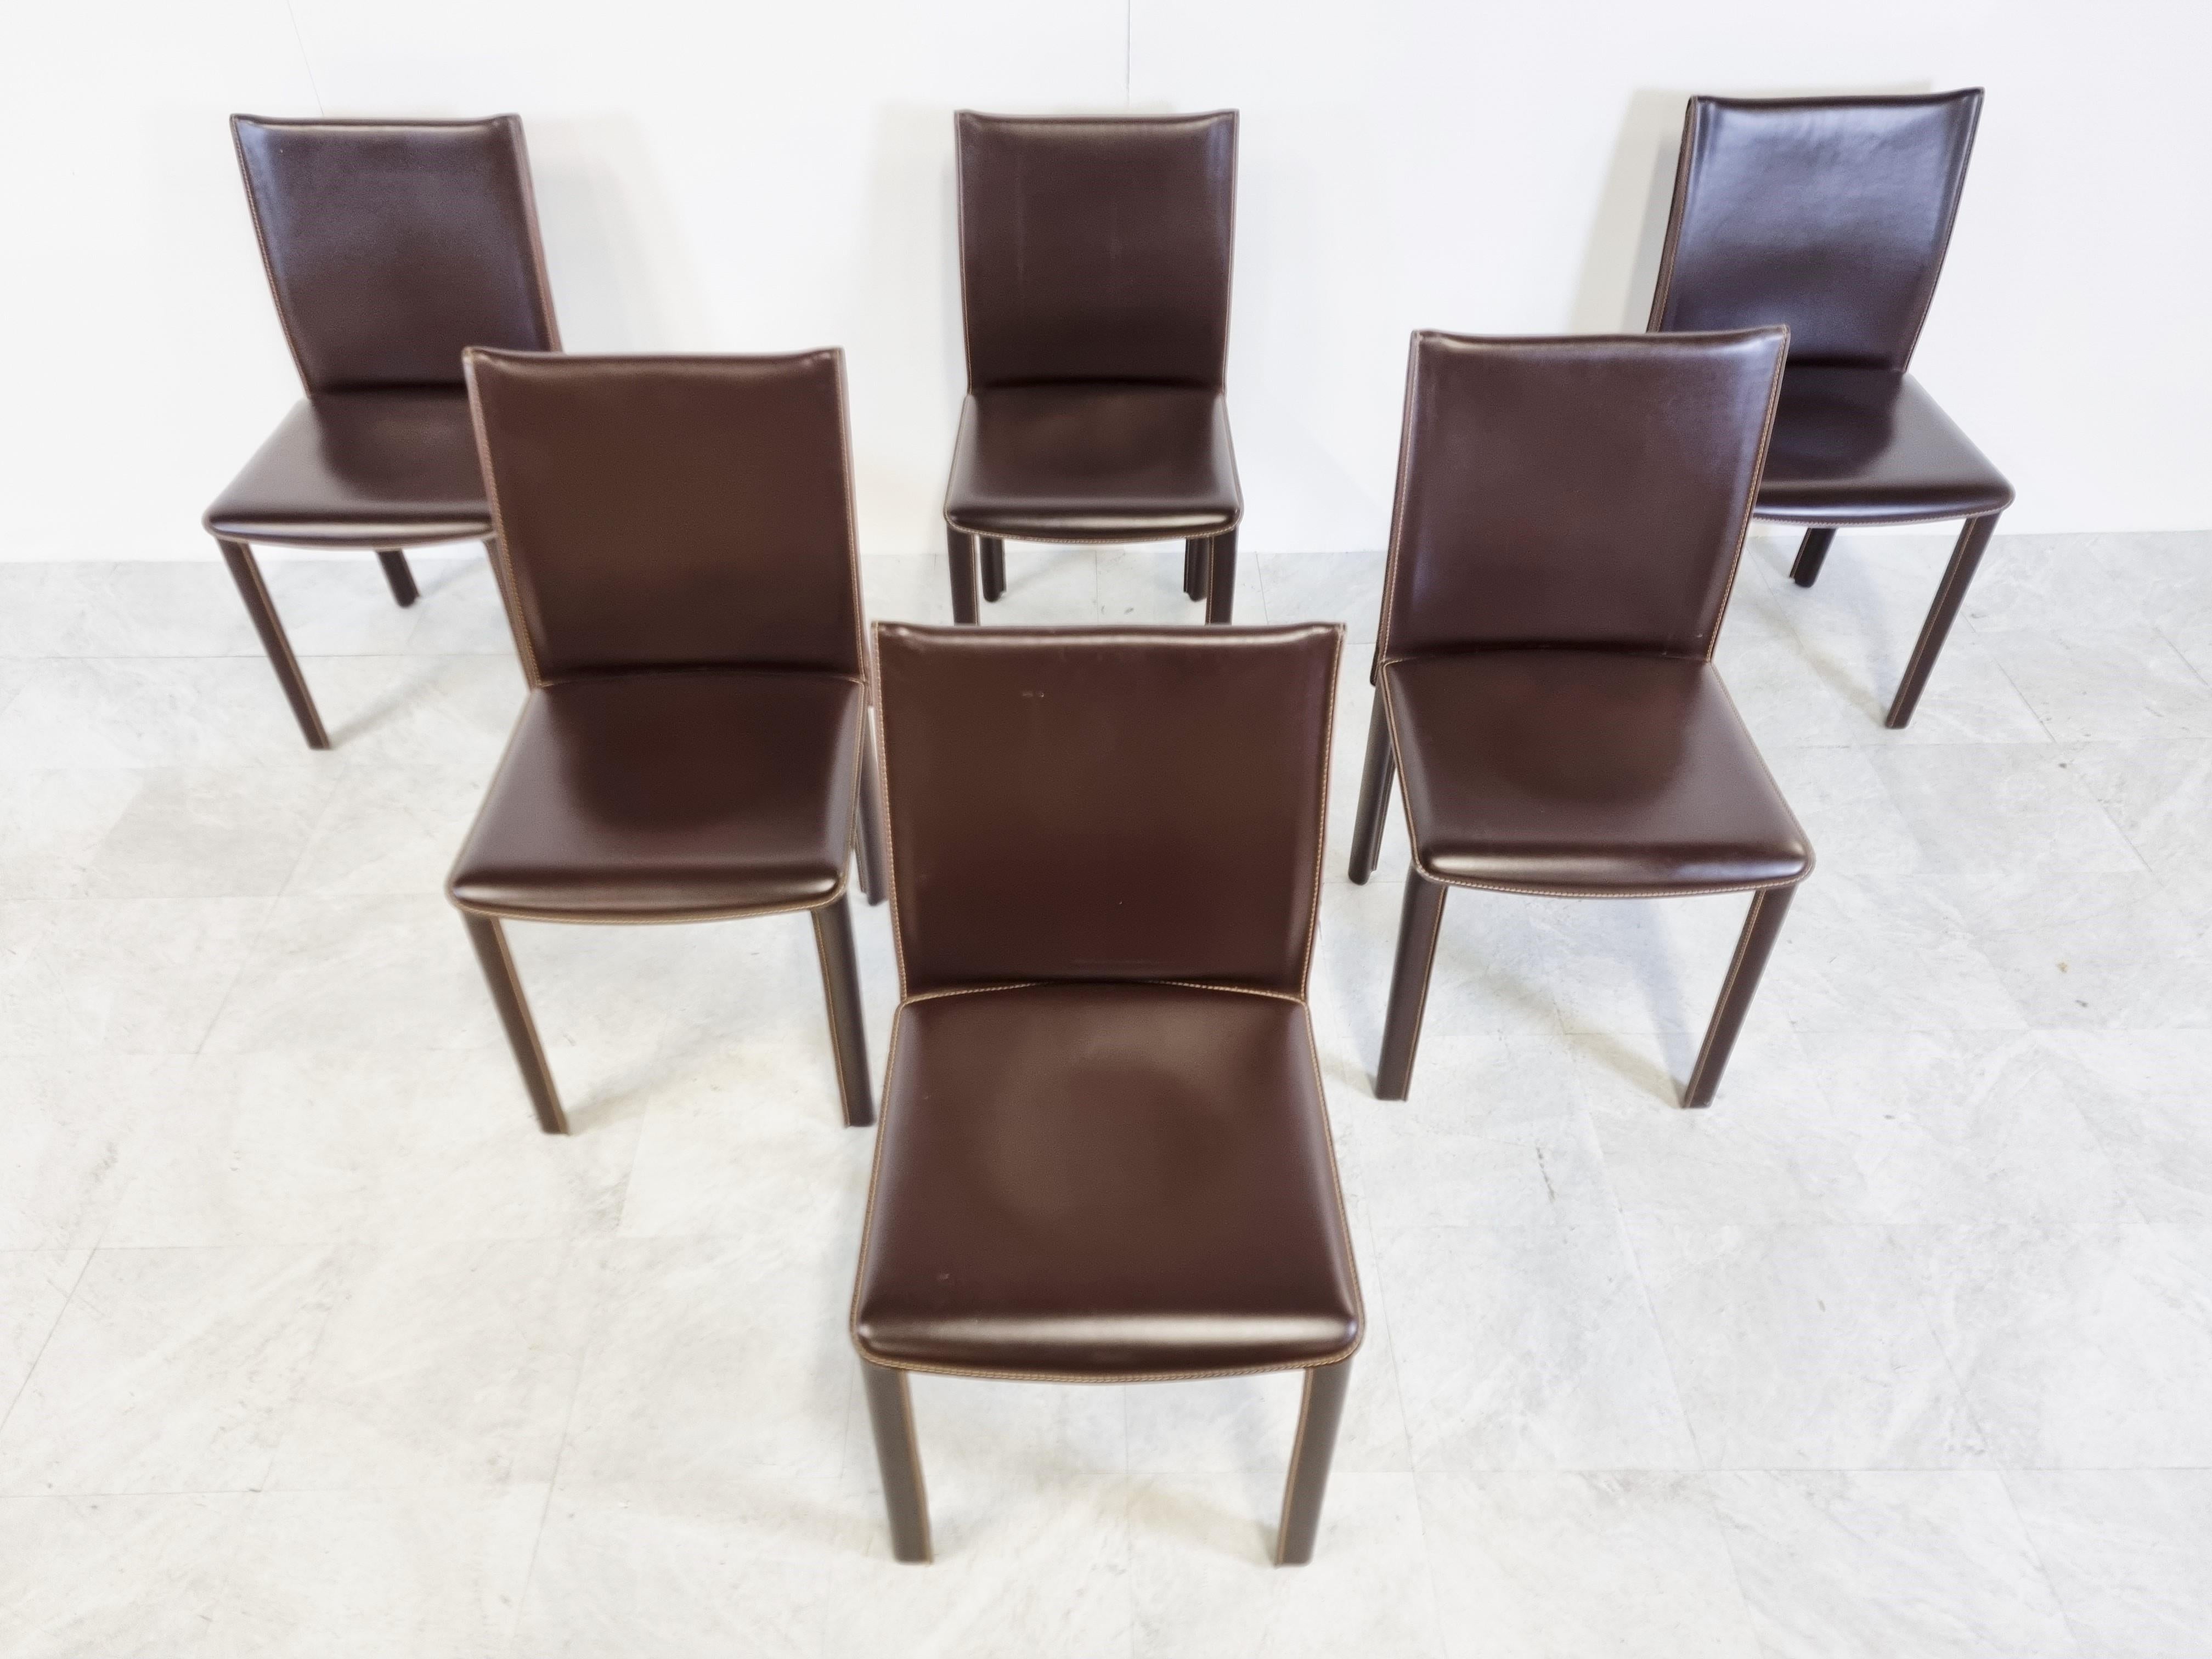 Vintage Brown Leather Dining Chairs by Arper Italy, 1980s 1